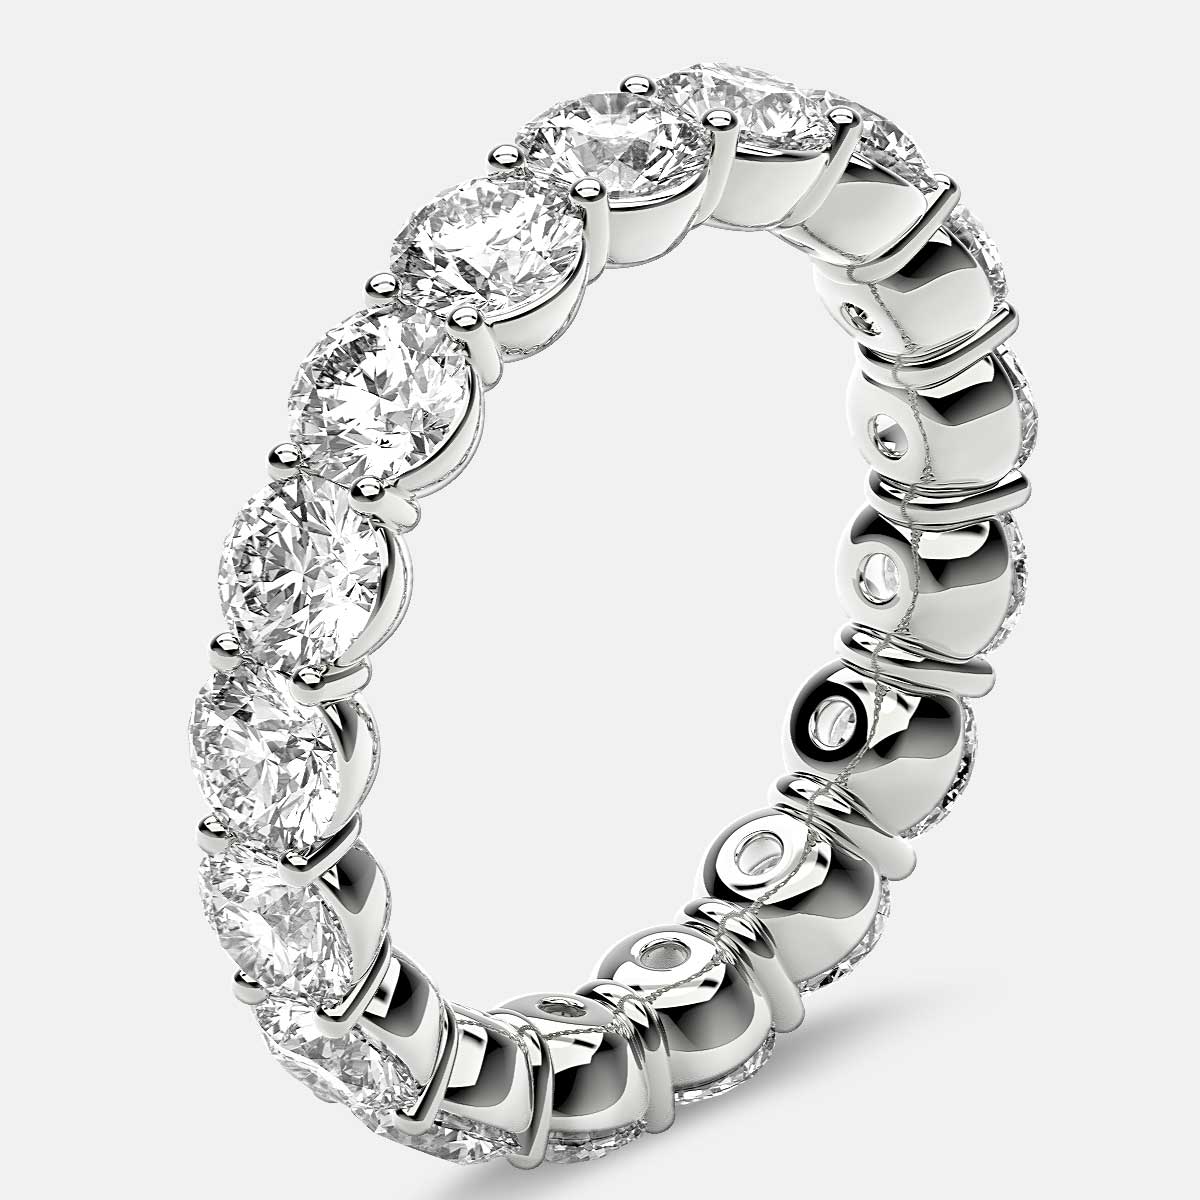 Classic Prong Set Eternity Ring with Round Diamonds in 18k White Gold